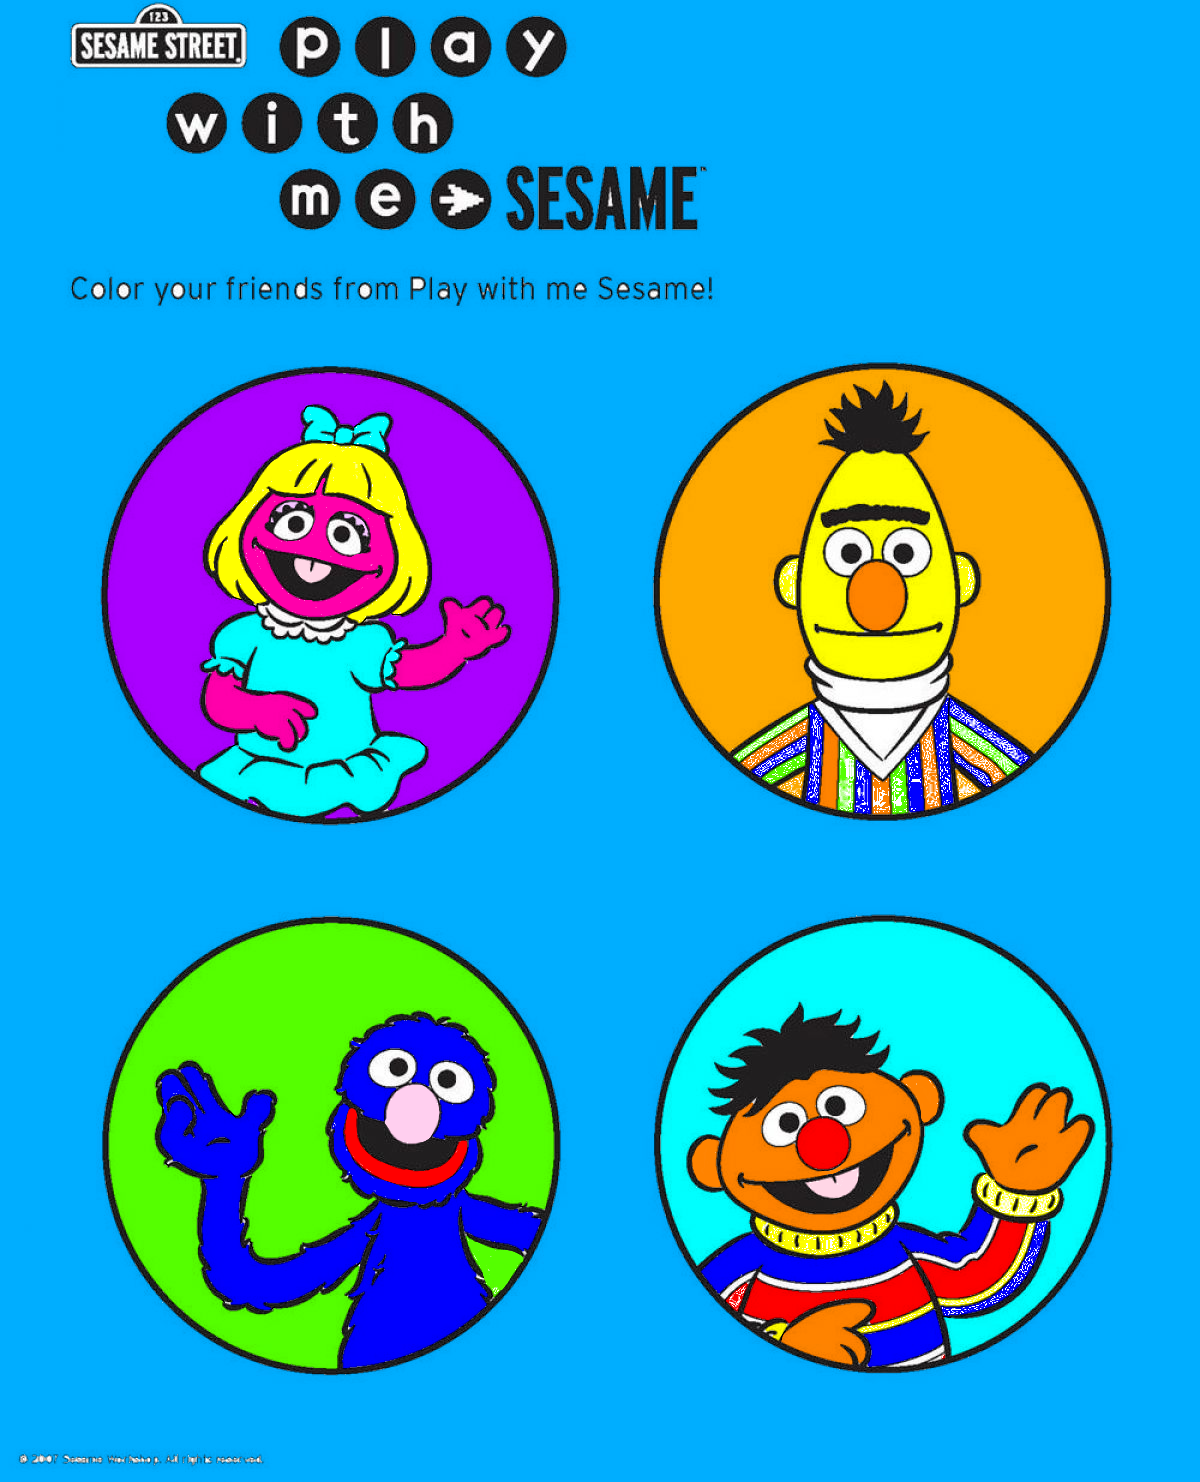 Play with me Sesame by drawingliker100 on DeviantArt